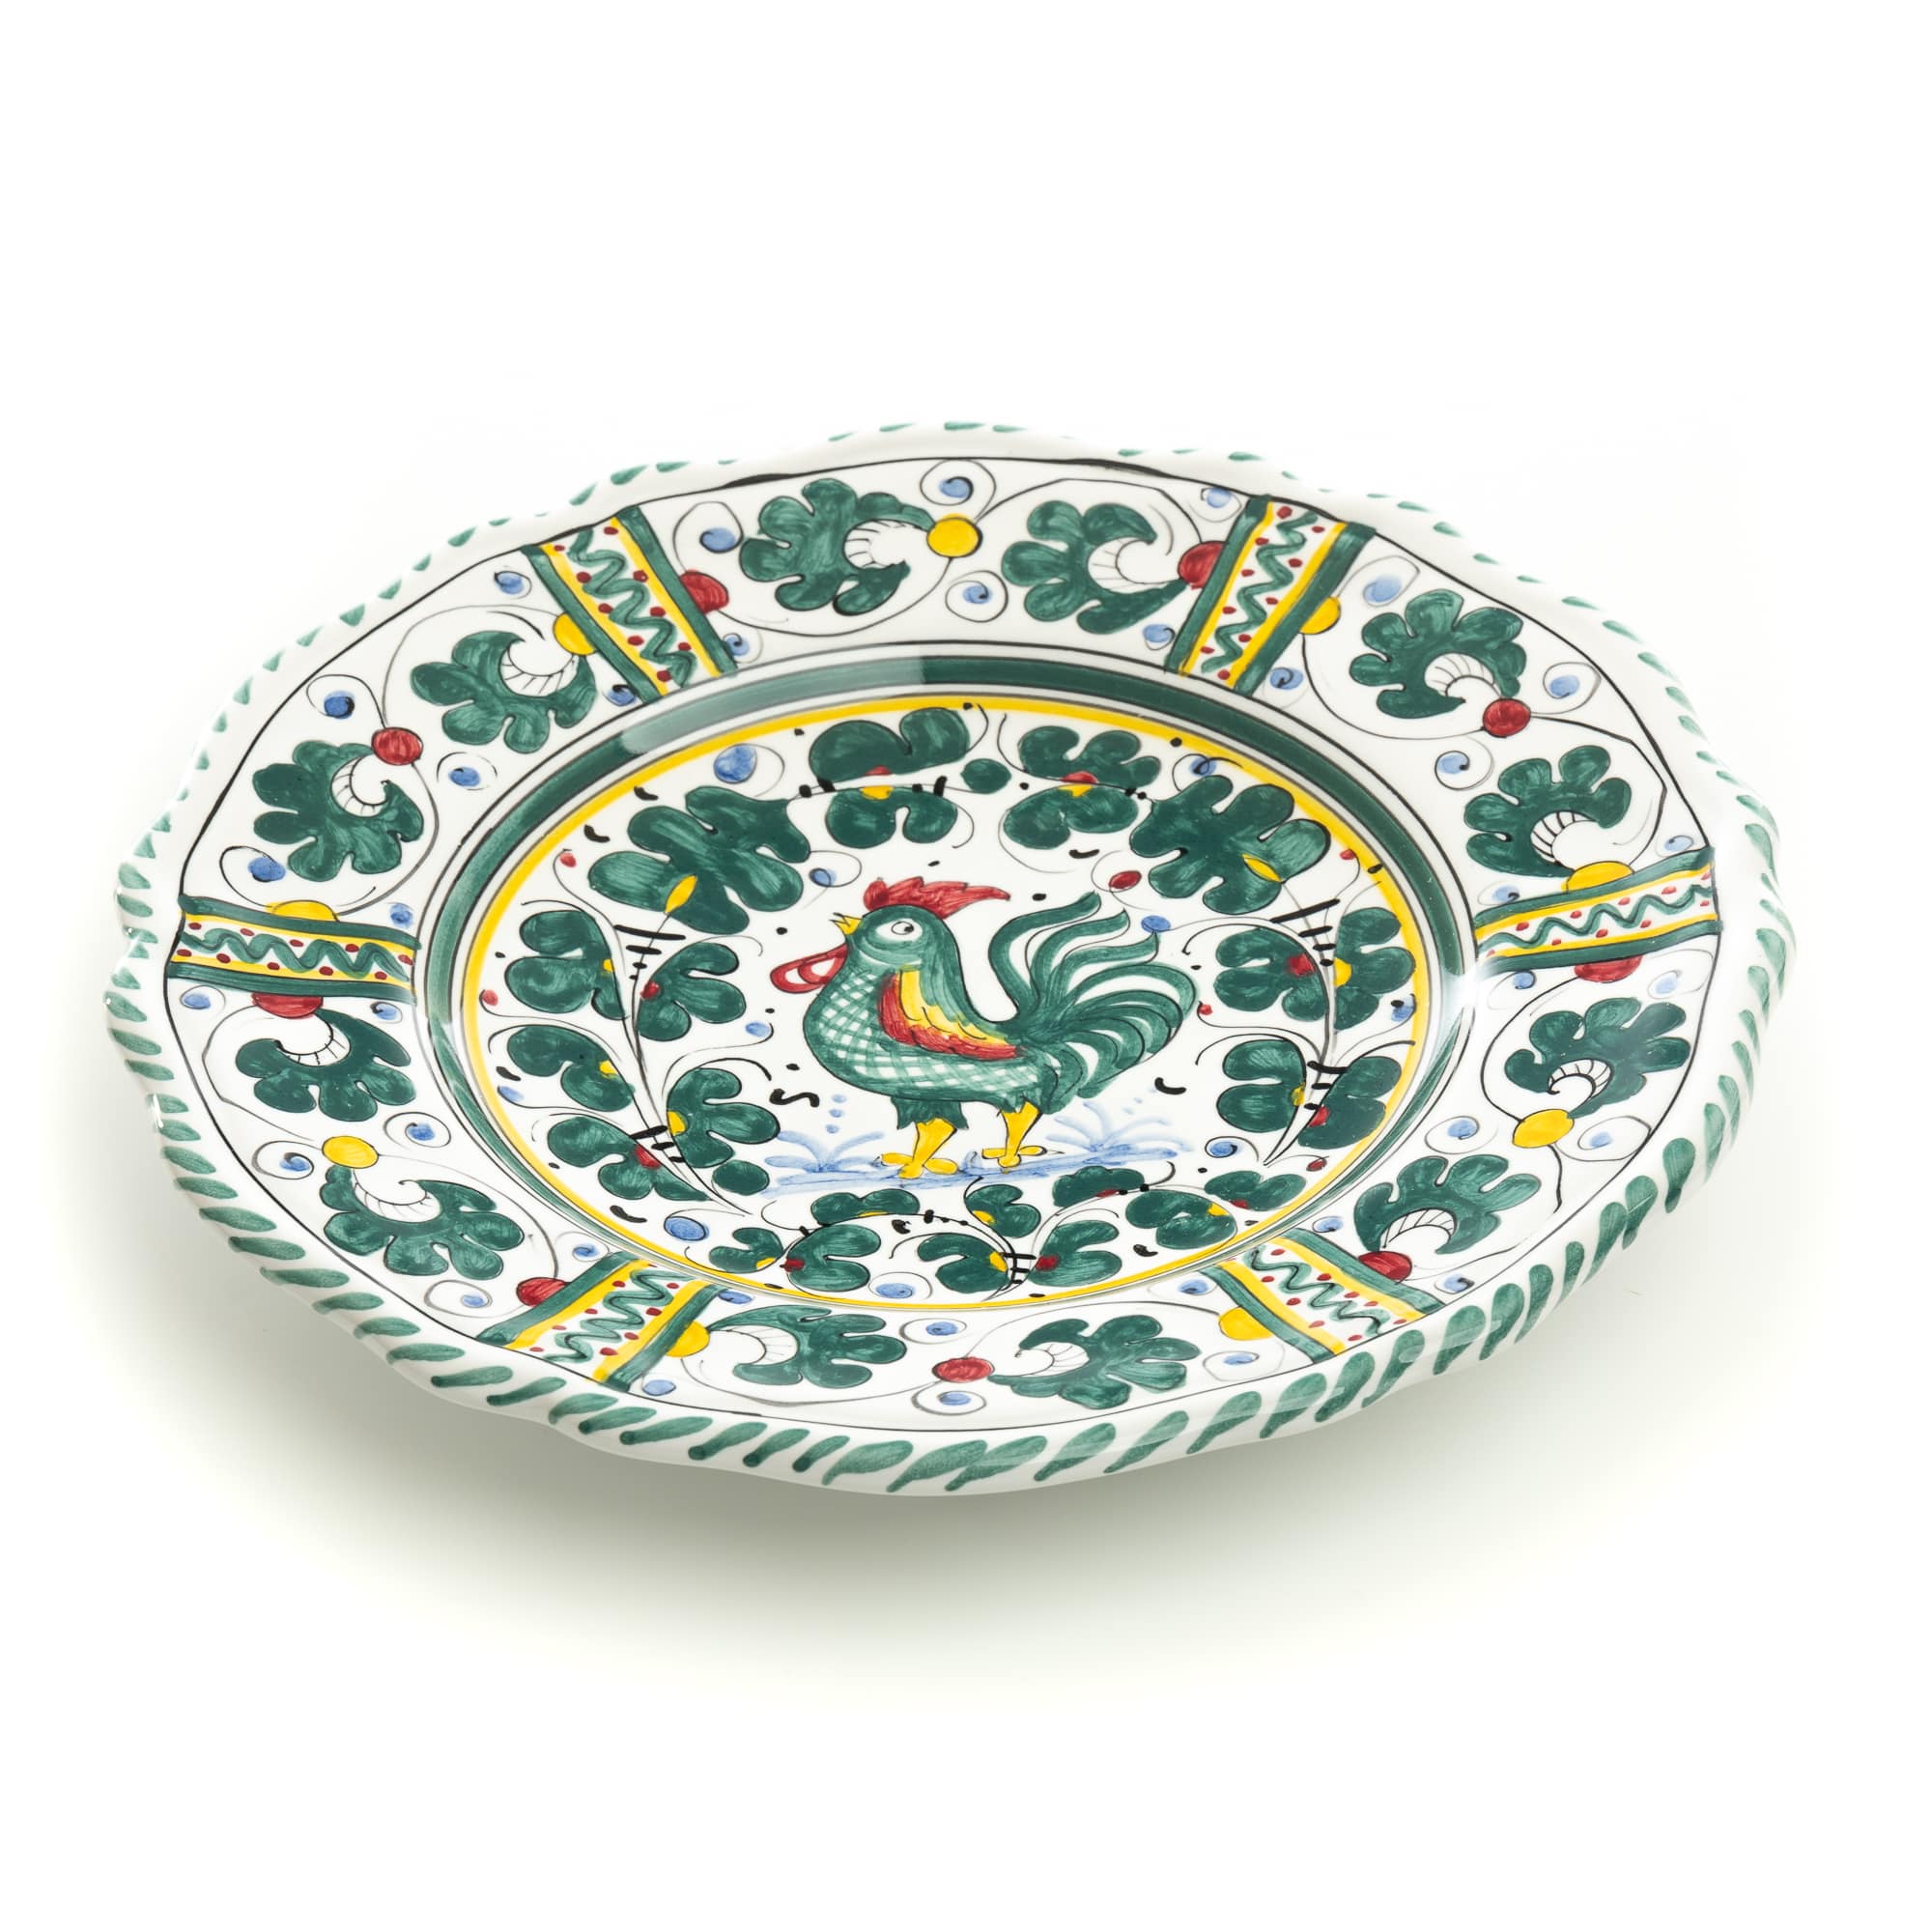 Orvieto Salad Plate, Full Design, ceramics, pottery, italian design, majolica, handmade, handcrafted, handpainted, home decor, kitchen art, home goods, deruta, majolica, Artisan, treasures, traditional art, modern art, gift ideas, style, SF, shop small business, artists, shop online, landmark store, legacy, one of a kind, limited edition, gift guide, gift shop, retail shop, decorations, shopping, italy, home staging, home decorating, home interiors